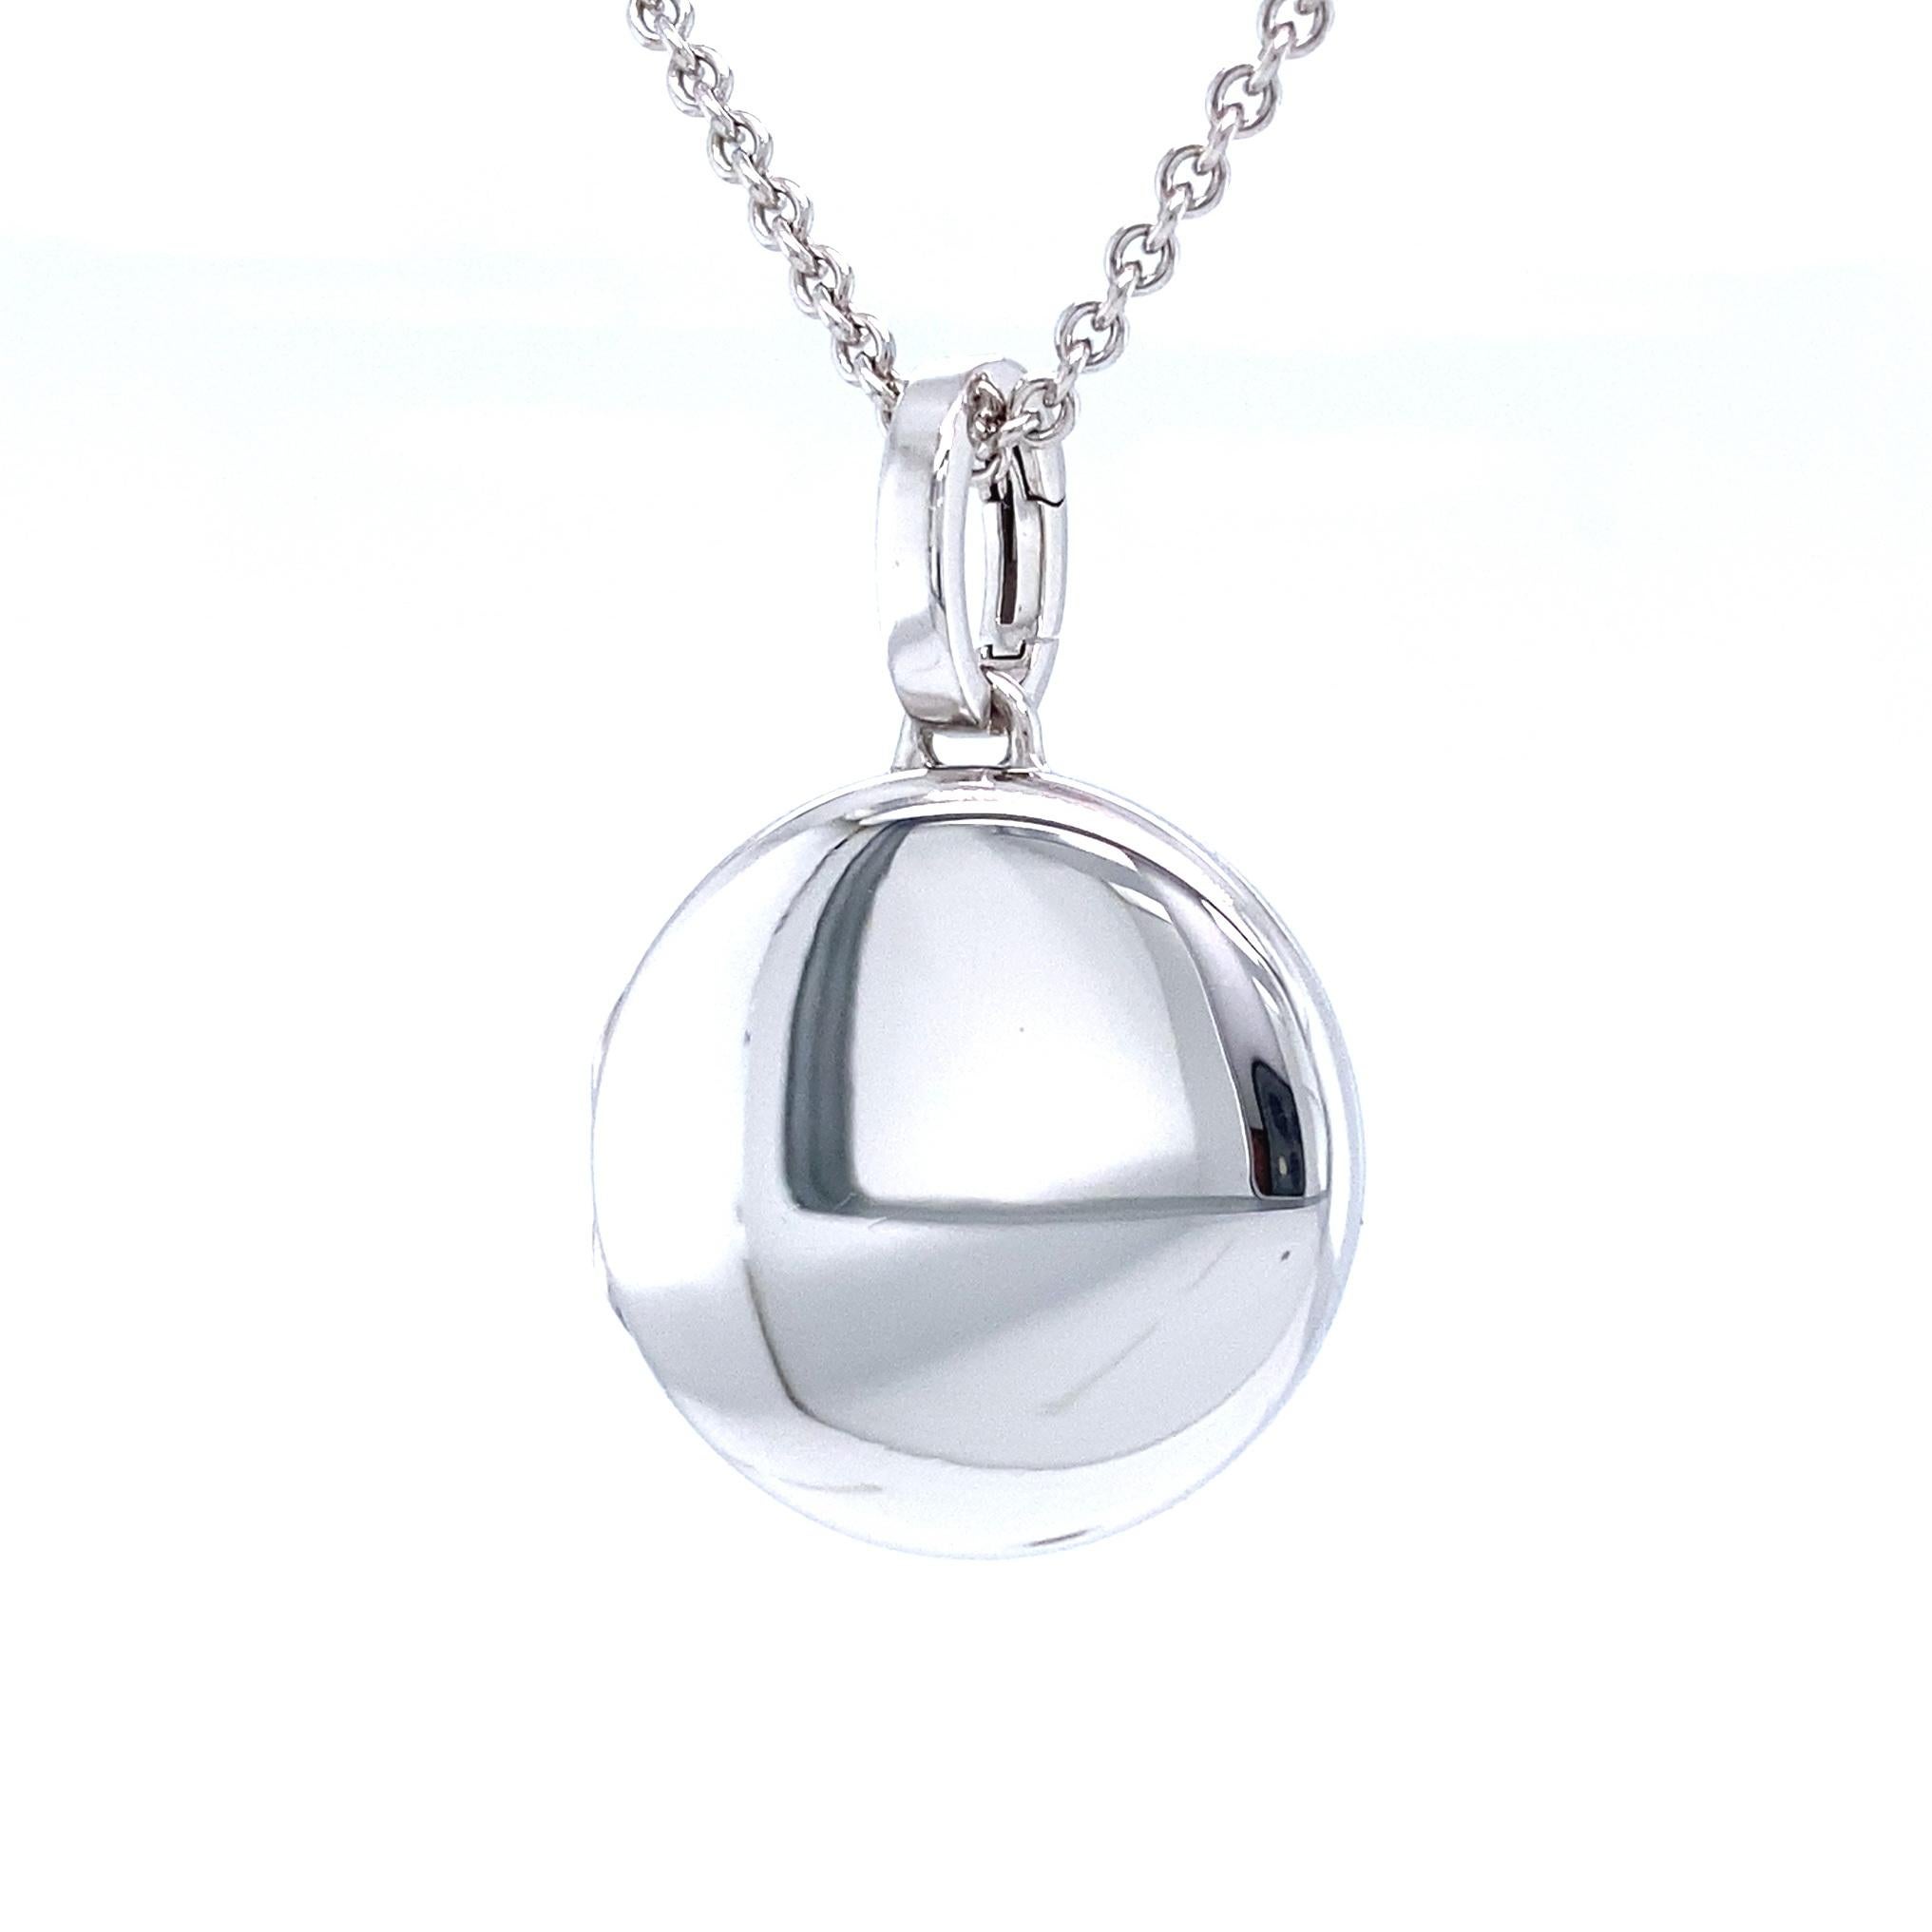 Victor Mayer round customizable polished locket pendant necklace, 18k white gold, Hallmark Collection, diameter app. 21.0 mm

About the creator Victor Mayer
Victor Mayer is internationally renowned for elegant timeless designs and unrivalled